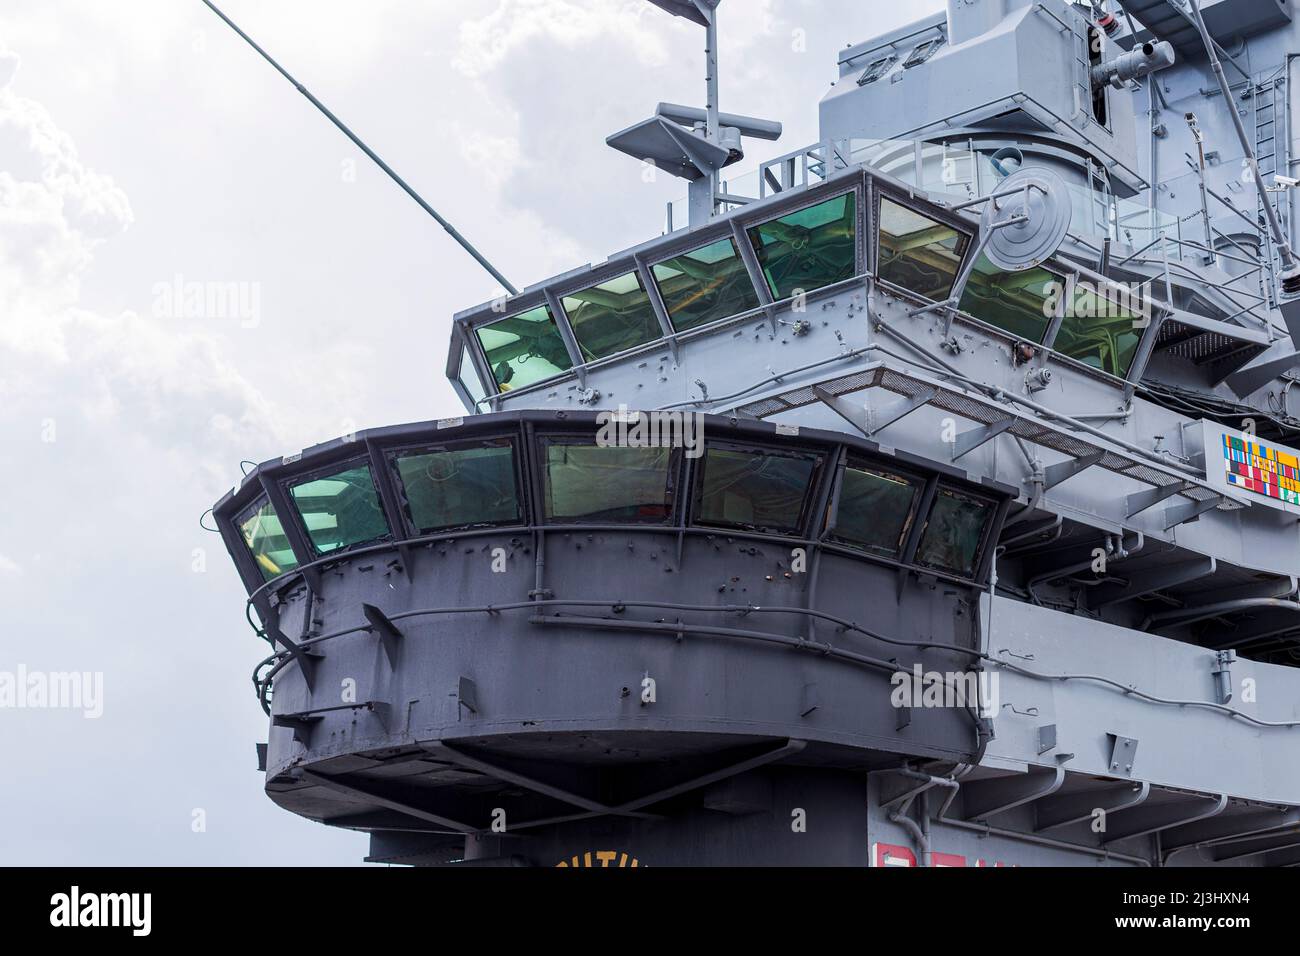 12 AV/W 46 ST, New York City, NY, USA, The Bridge of the Intrepid Sea, Air & Space Museum - an american military and maritime history museum and showcases the aircraft carrier USS Intrepid. Stock Photo